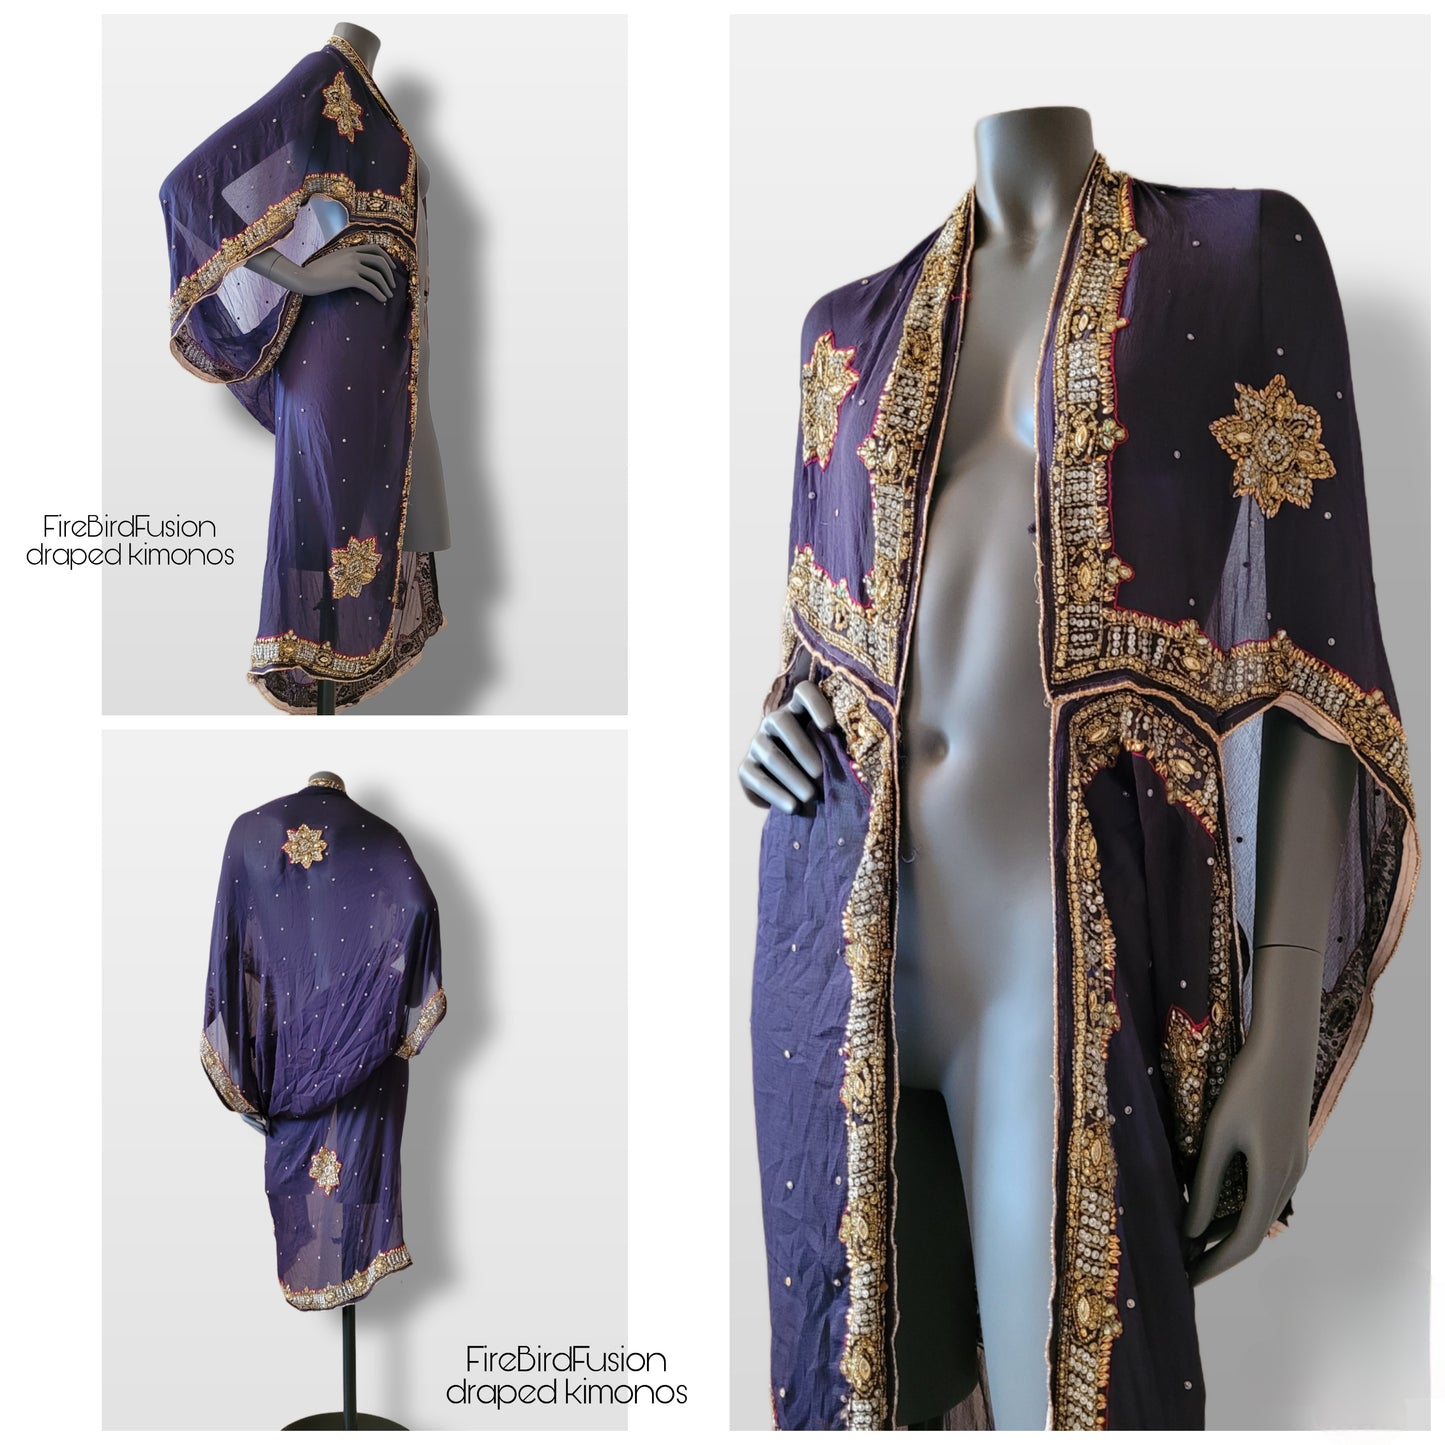 Draped kimono in dark plum with elaborated hand embellishments in gold, silver, red and yellow (L)